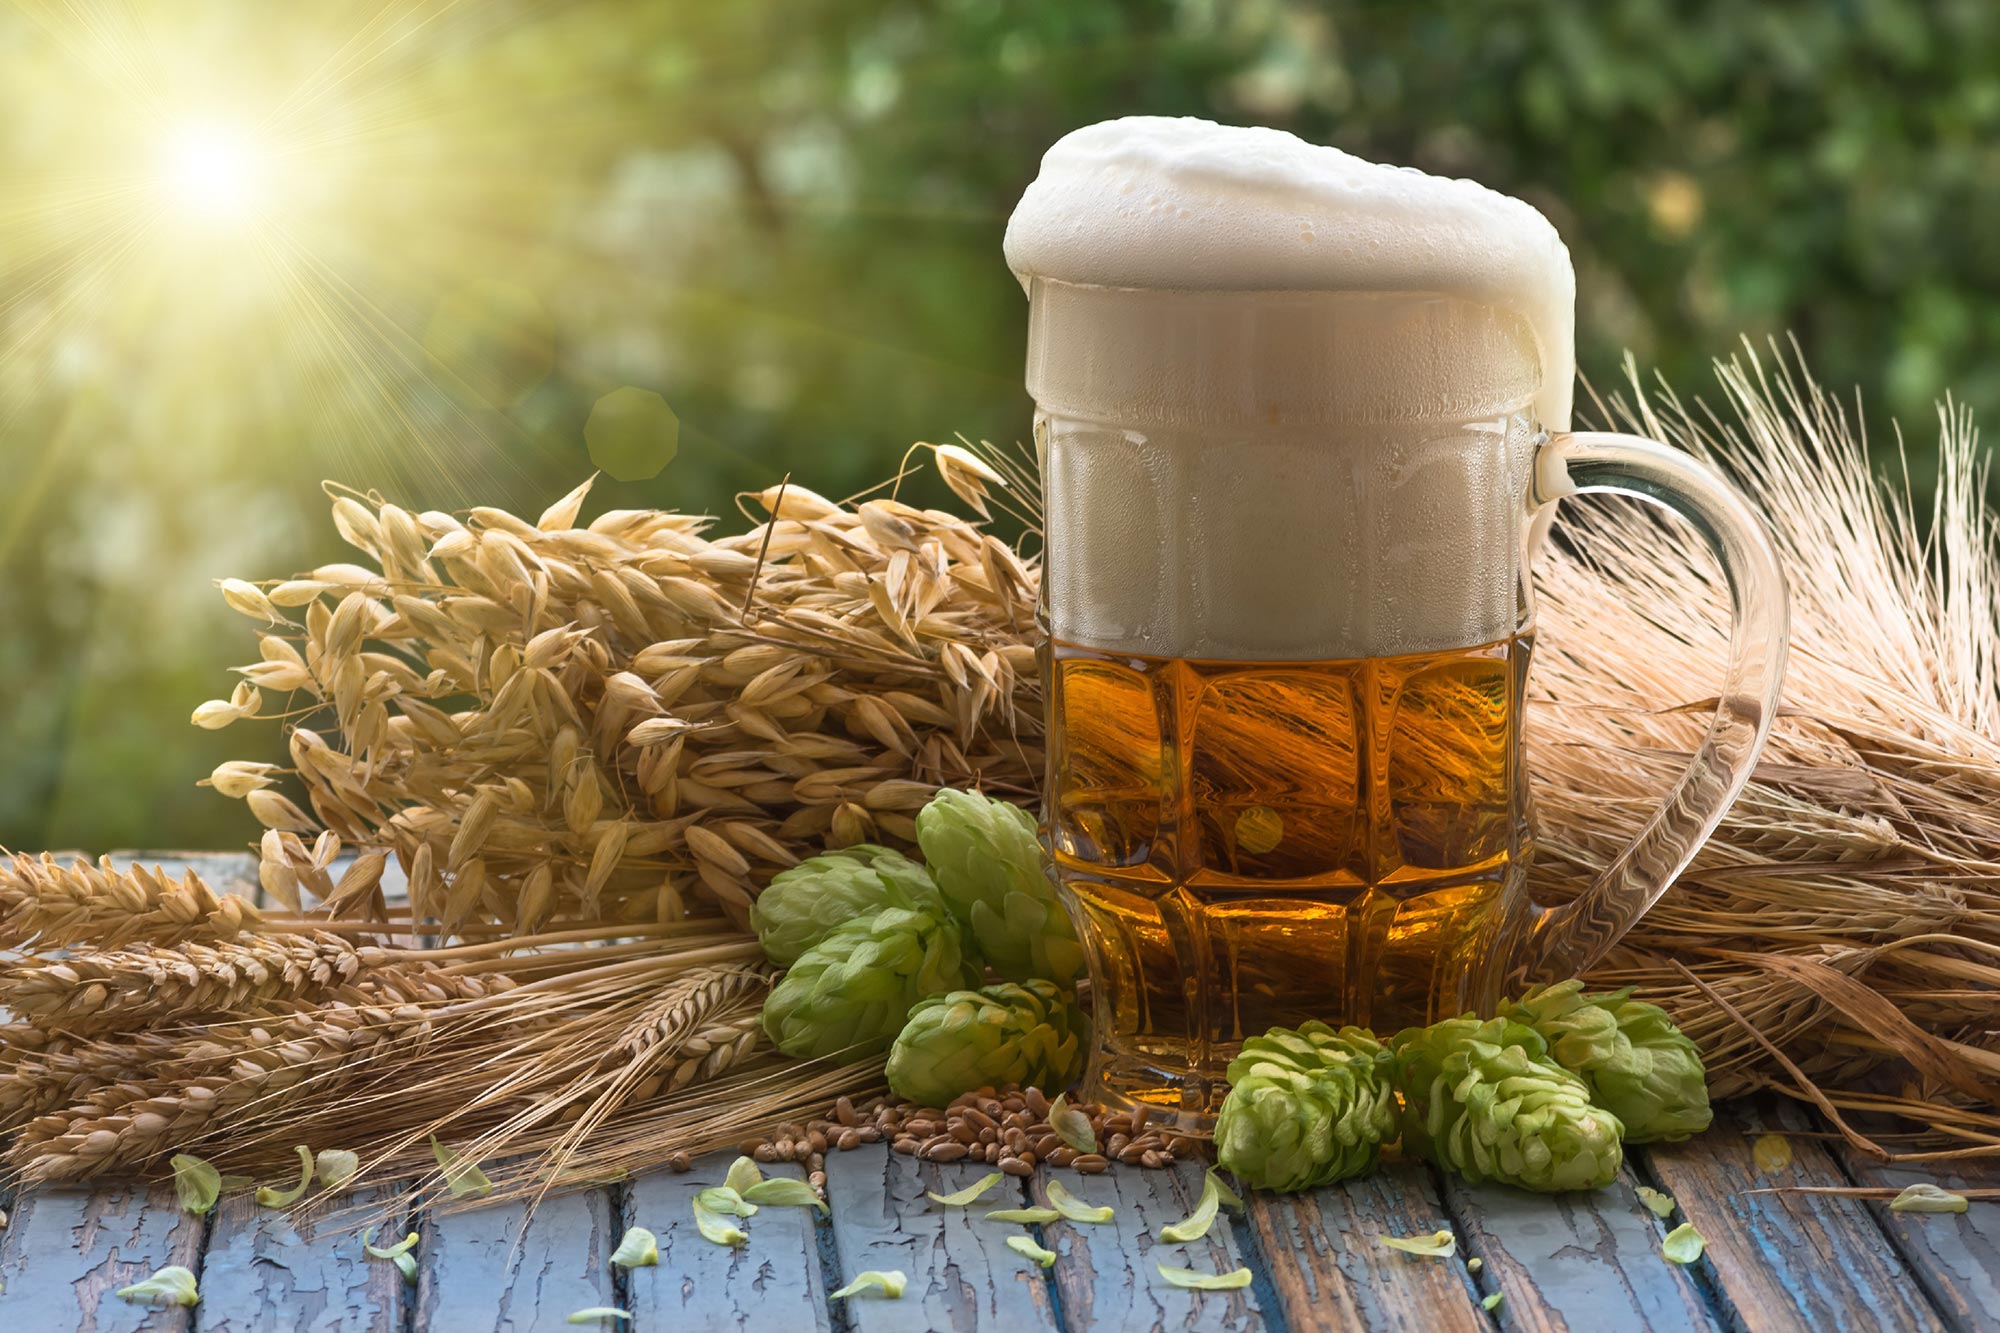 “Hoppy” Health Benefits – Beer Hops Compounds Could Help Protect Against Alzheimer’s Disease